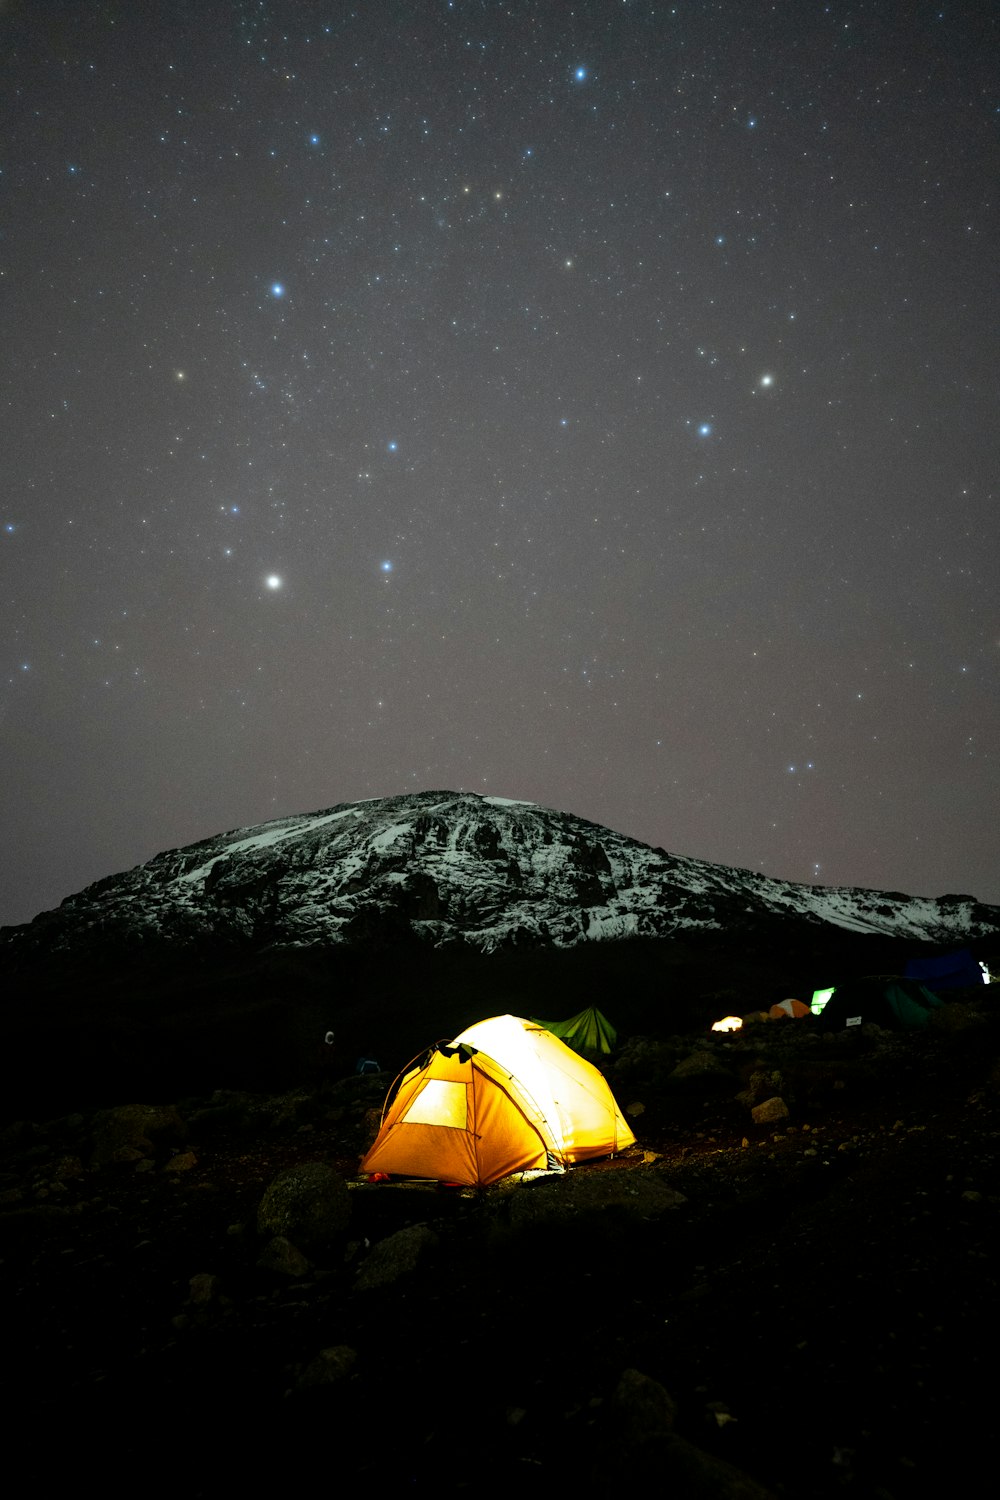 a tent pitched up on a mountain under a night sky filled with stars